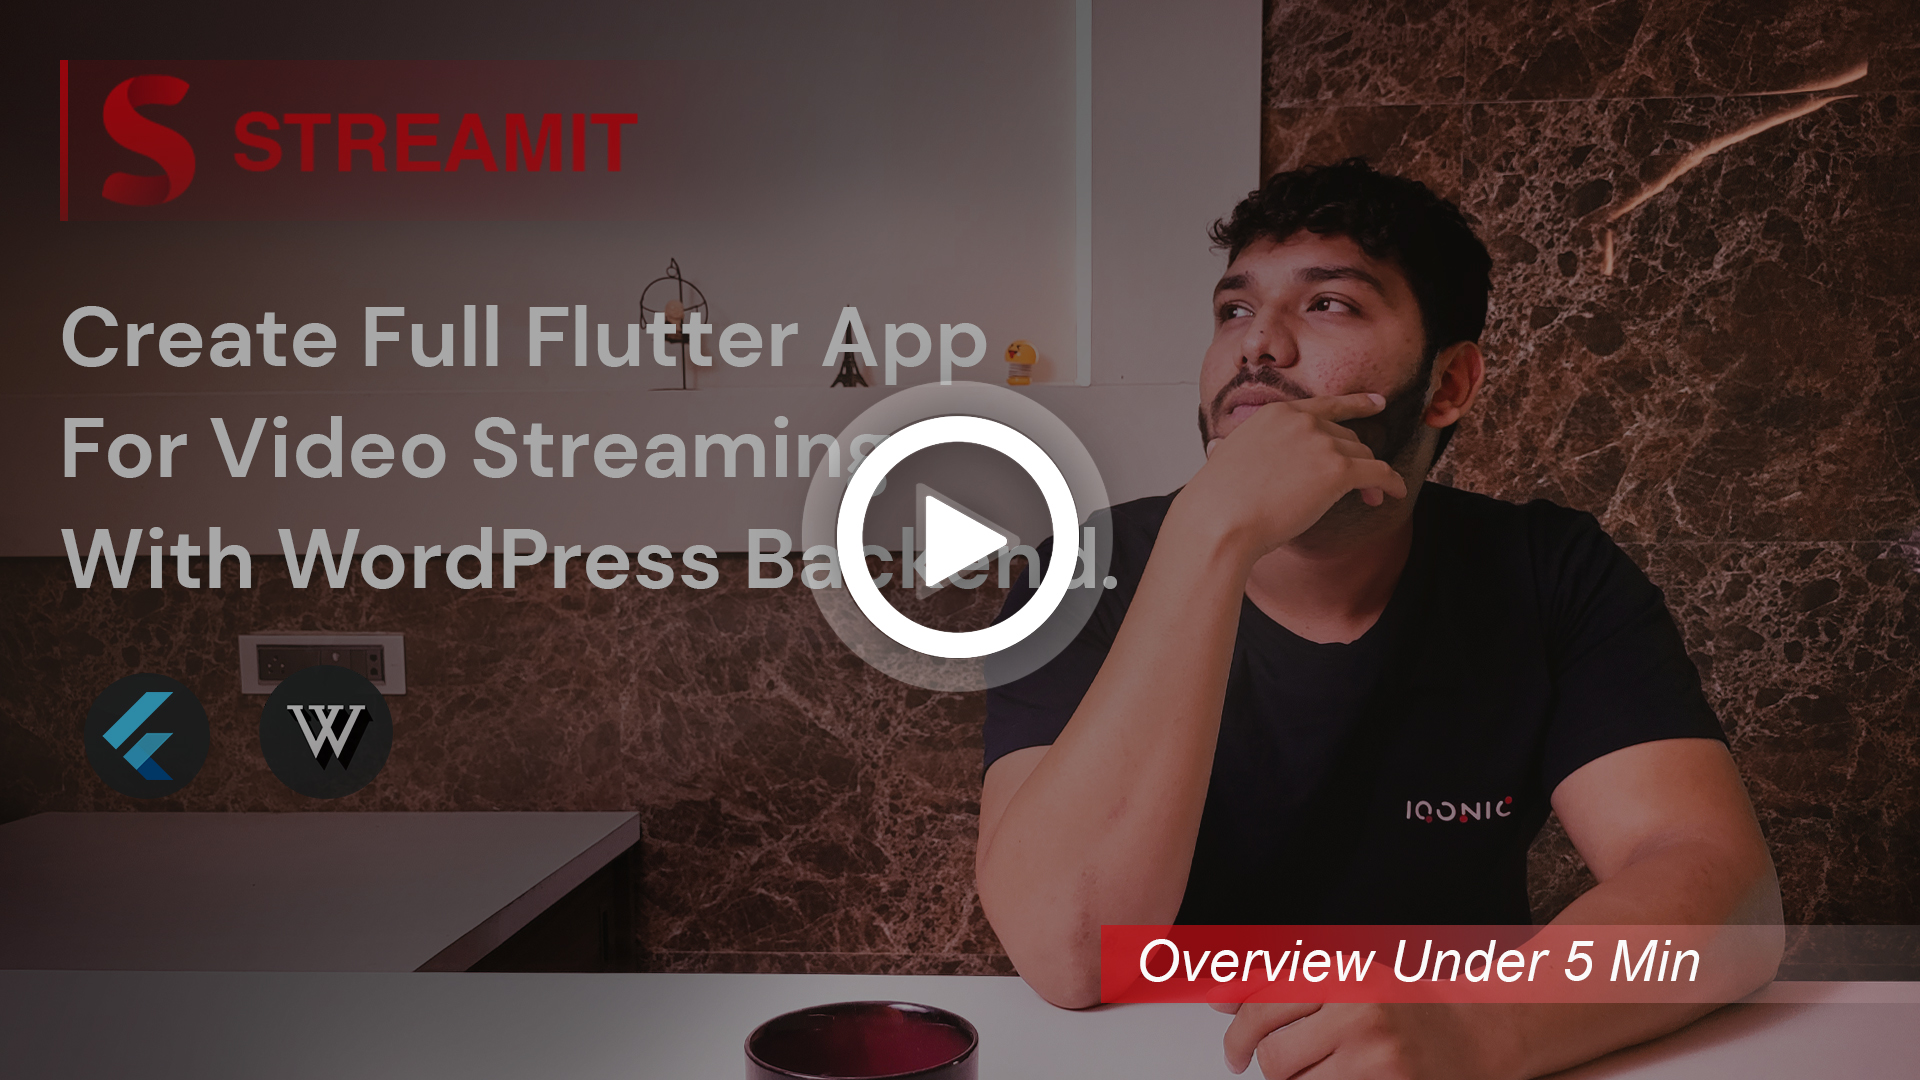 Streamit - Movie, TV Show, Video Streaming Flutter App With WordPress Backend - 2